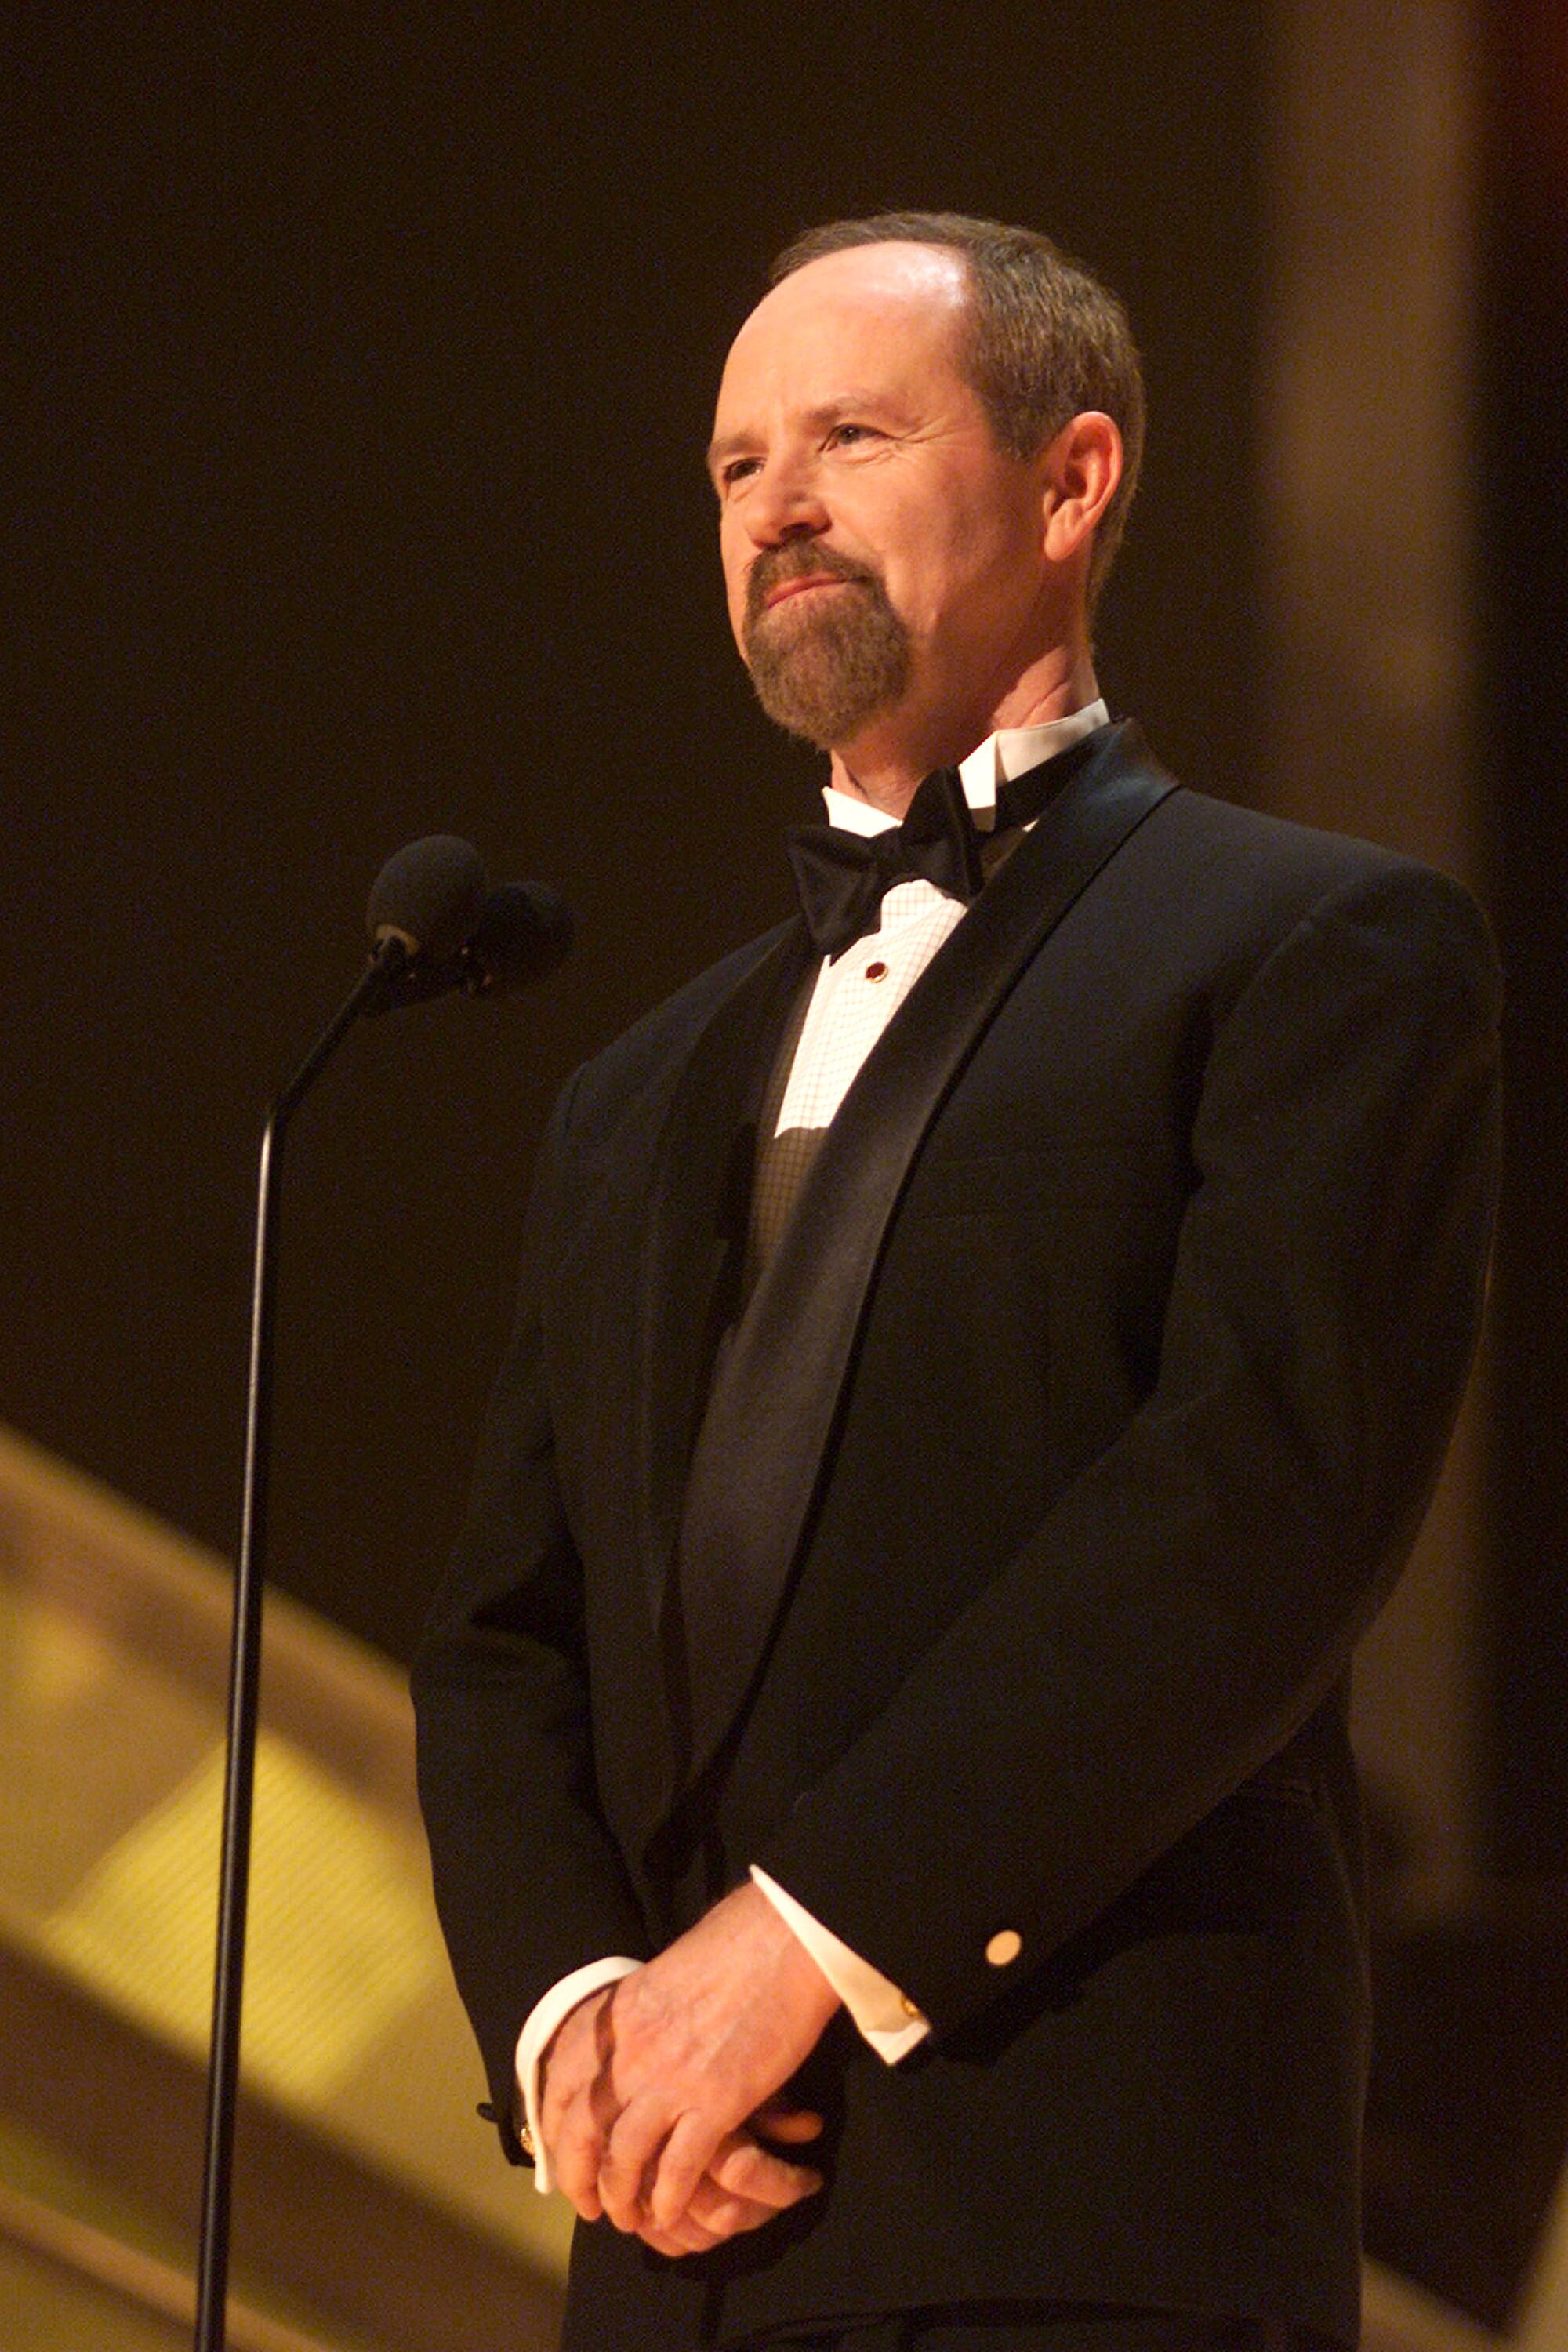 A smiling goateed man in a tuxedo